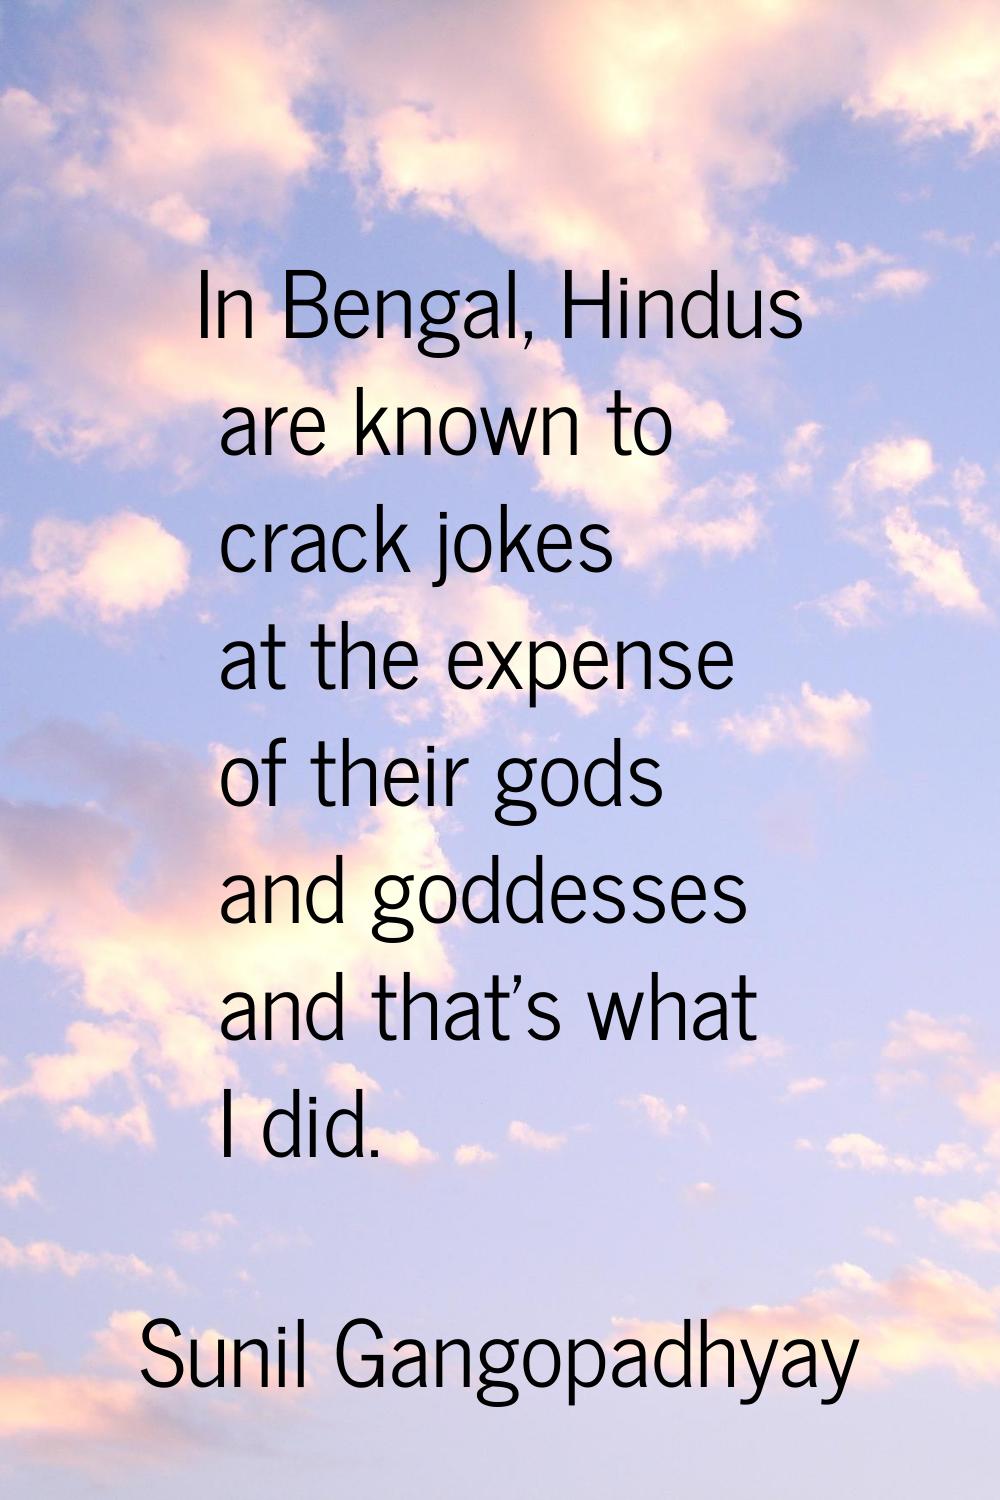 In Bengal, Hindus are known to crack jokes at the expense of their gods and goddesses and that's wh